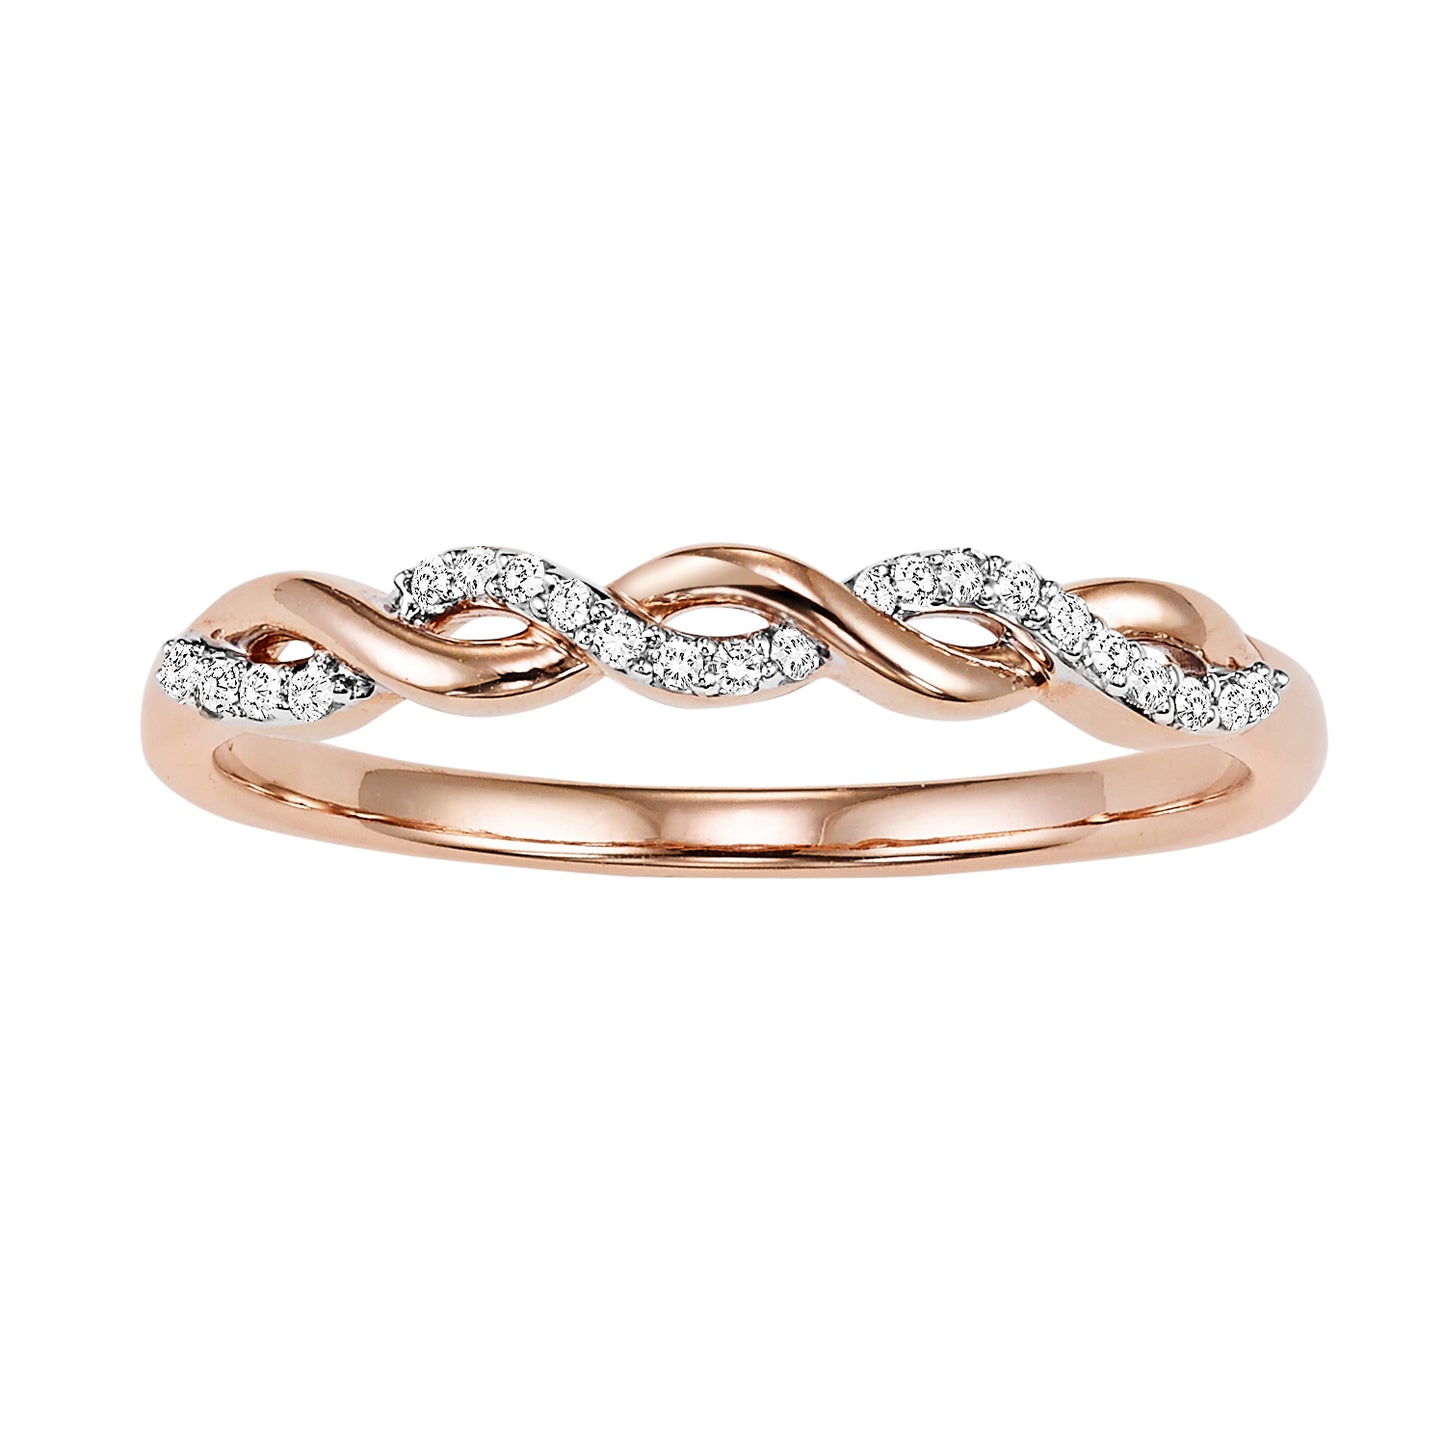 10K Rose Gold Diamond Stackable Ring - 1/15 ct.